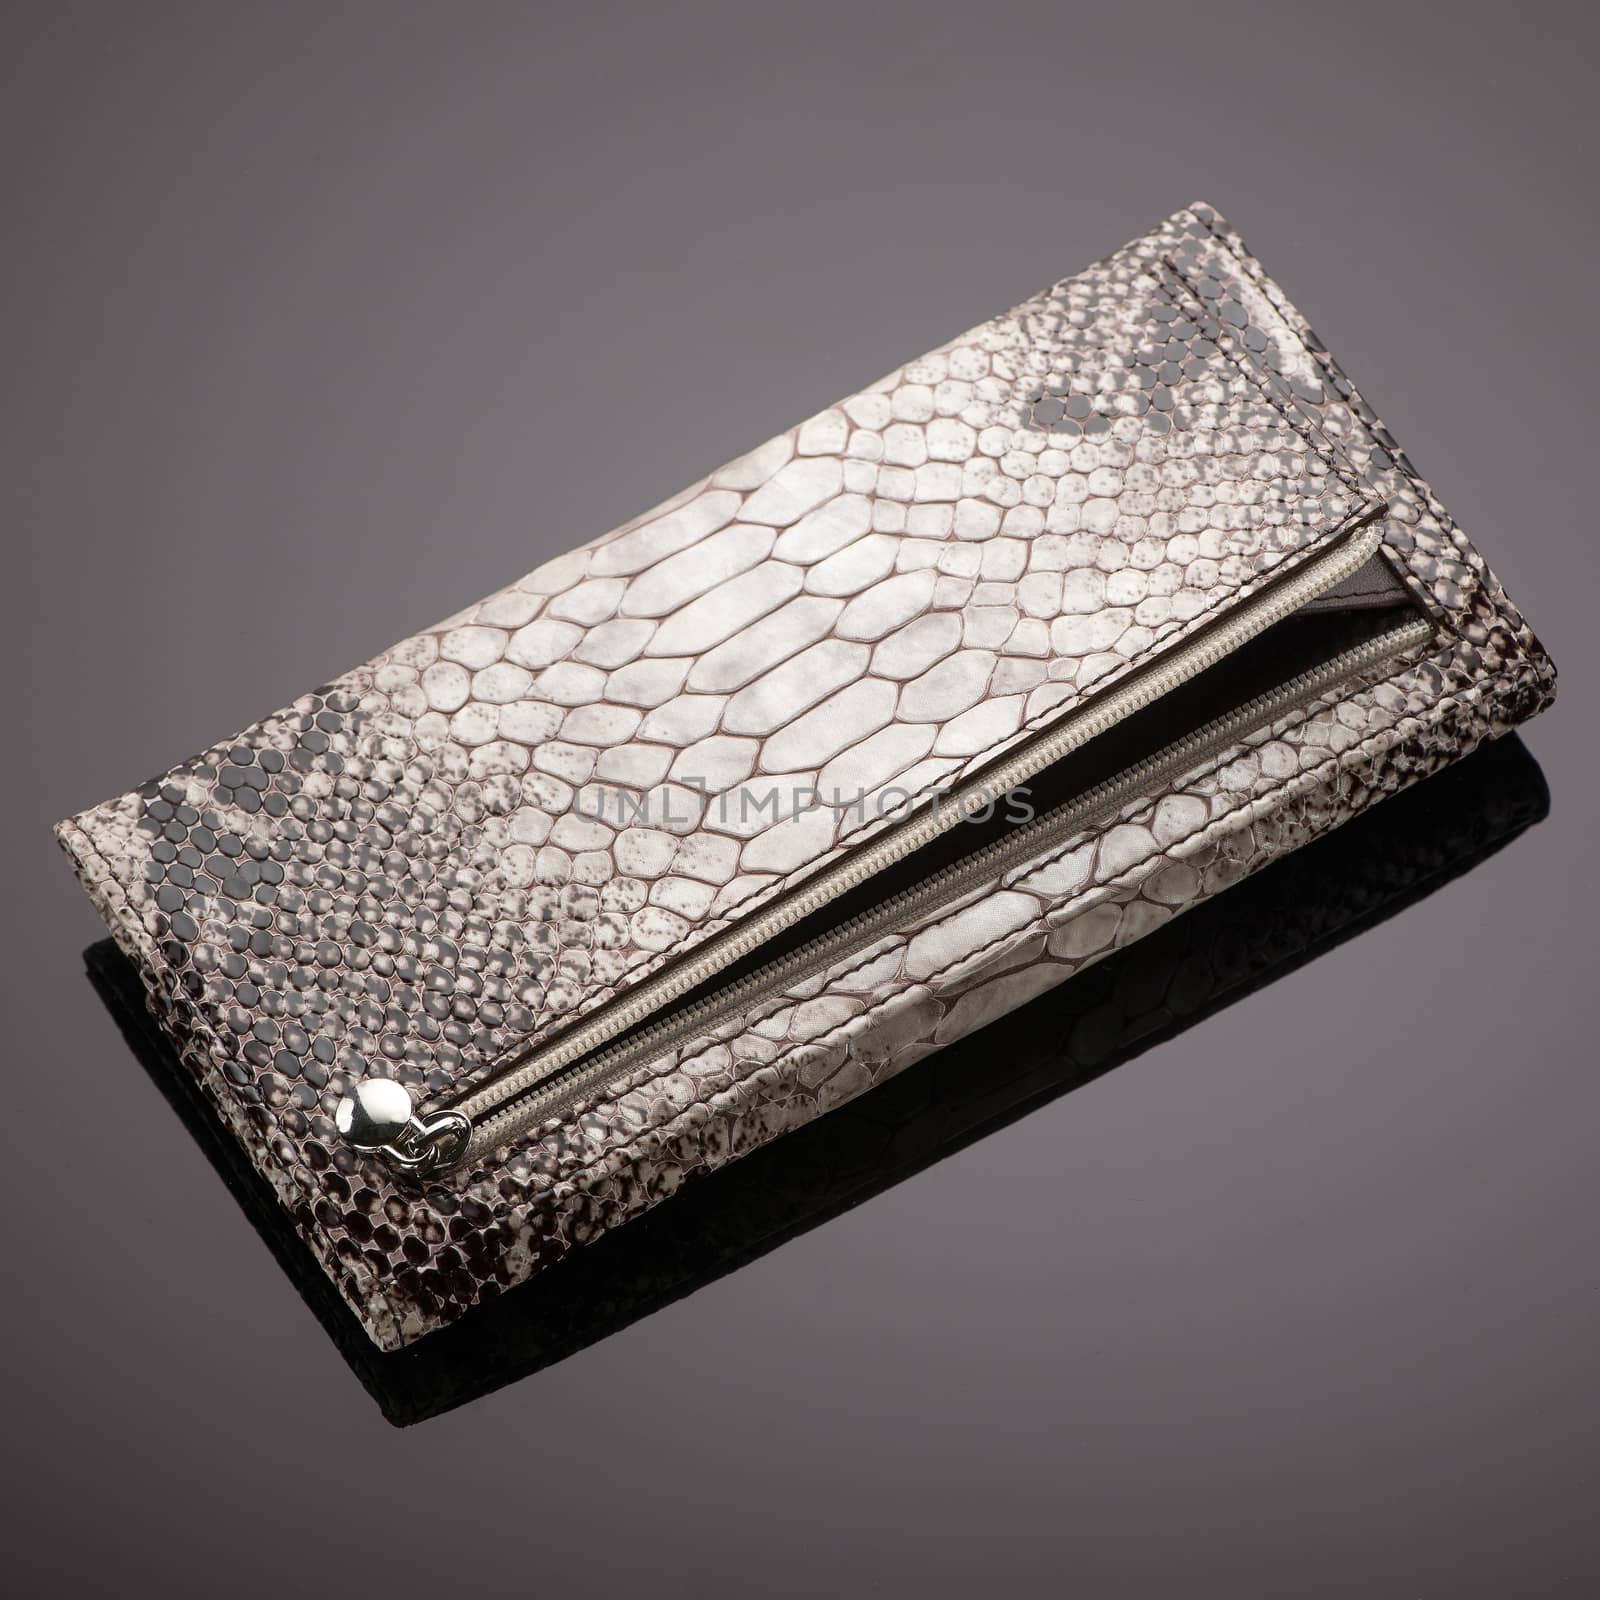 Fashionable women's wallet made of crocodile skin on a brown background